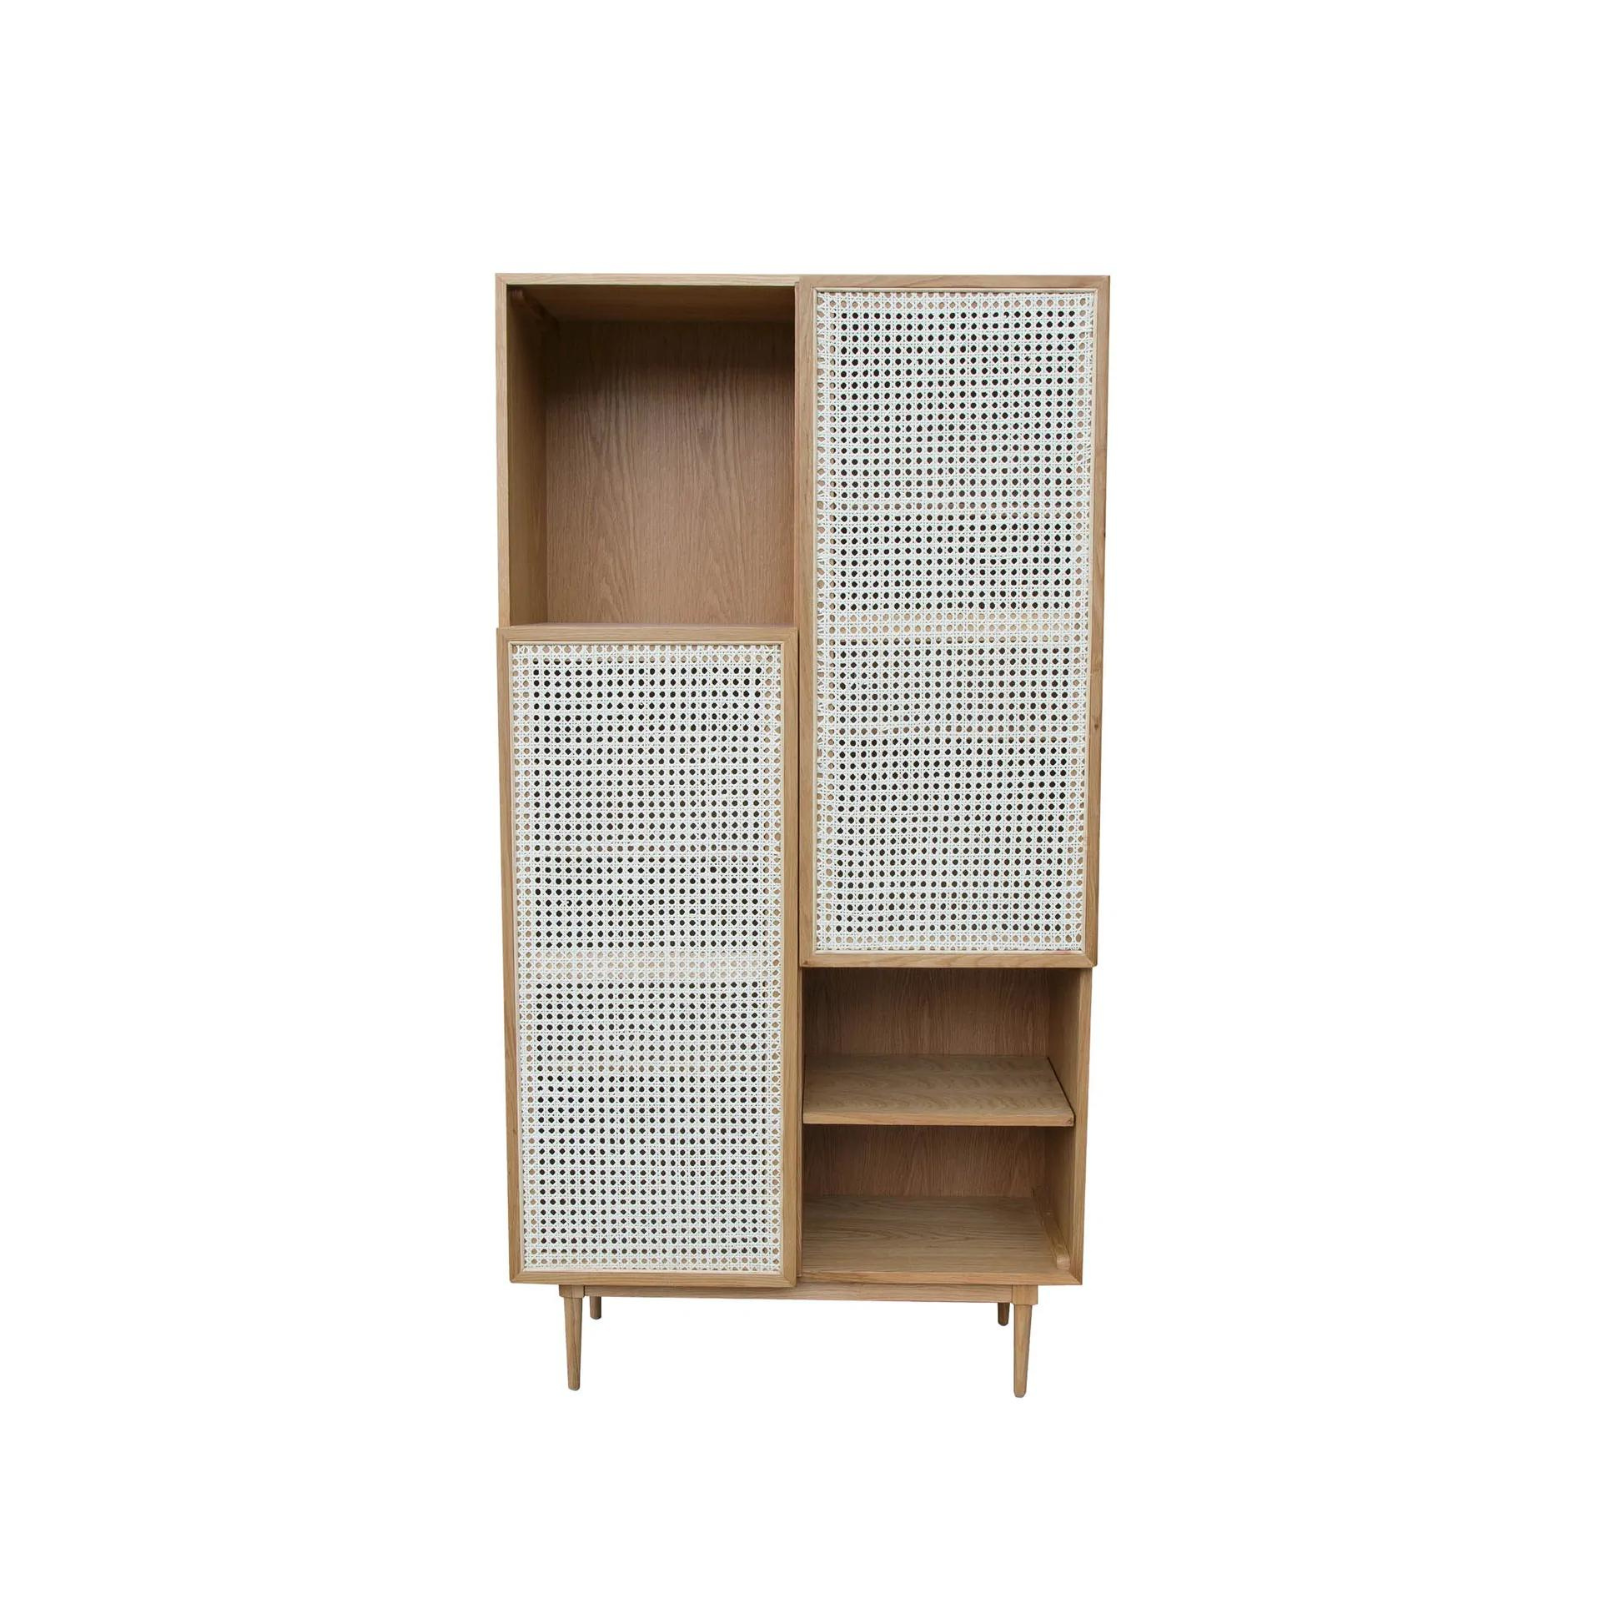 Christopher Bookcase - Natural